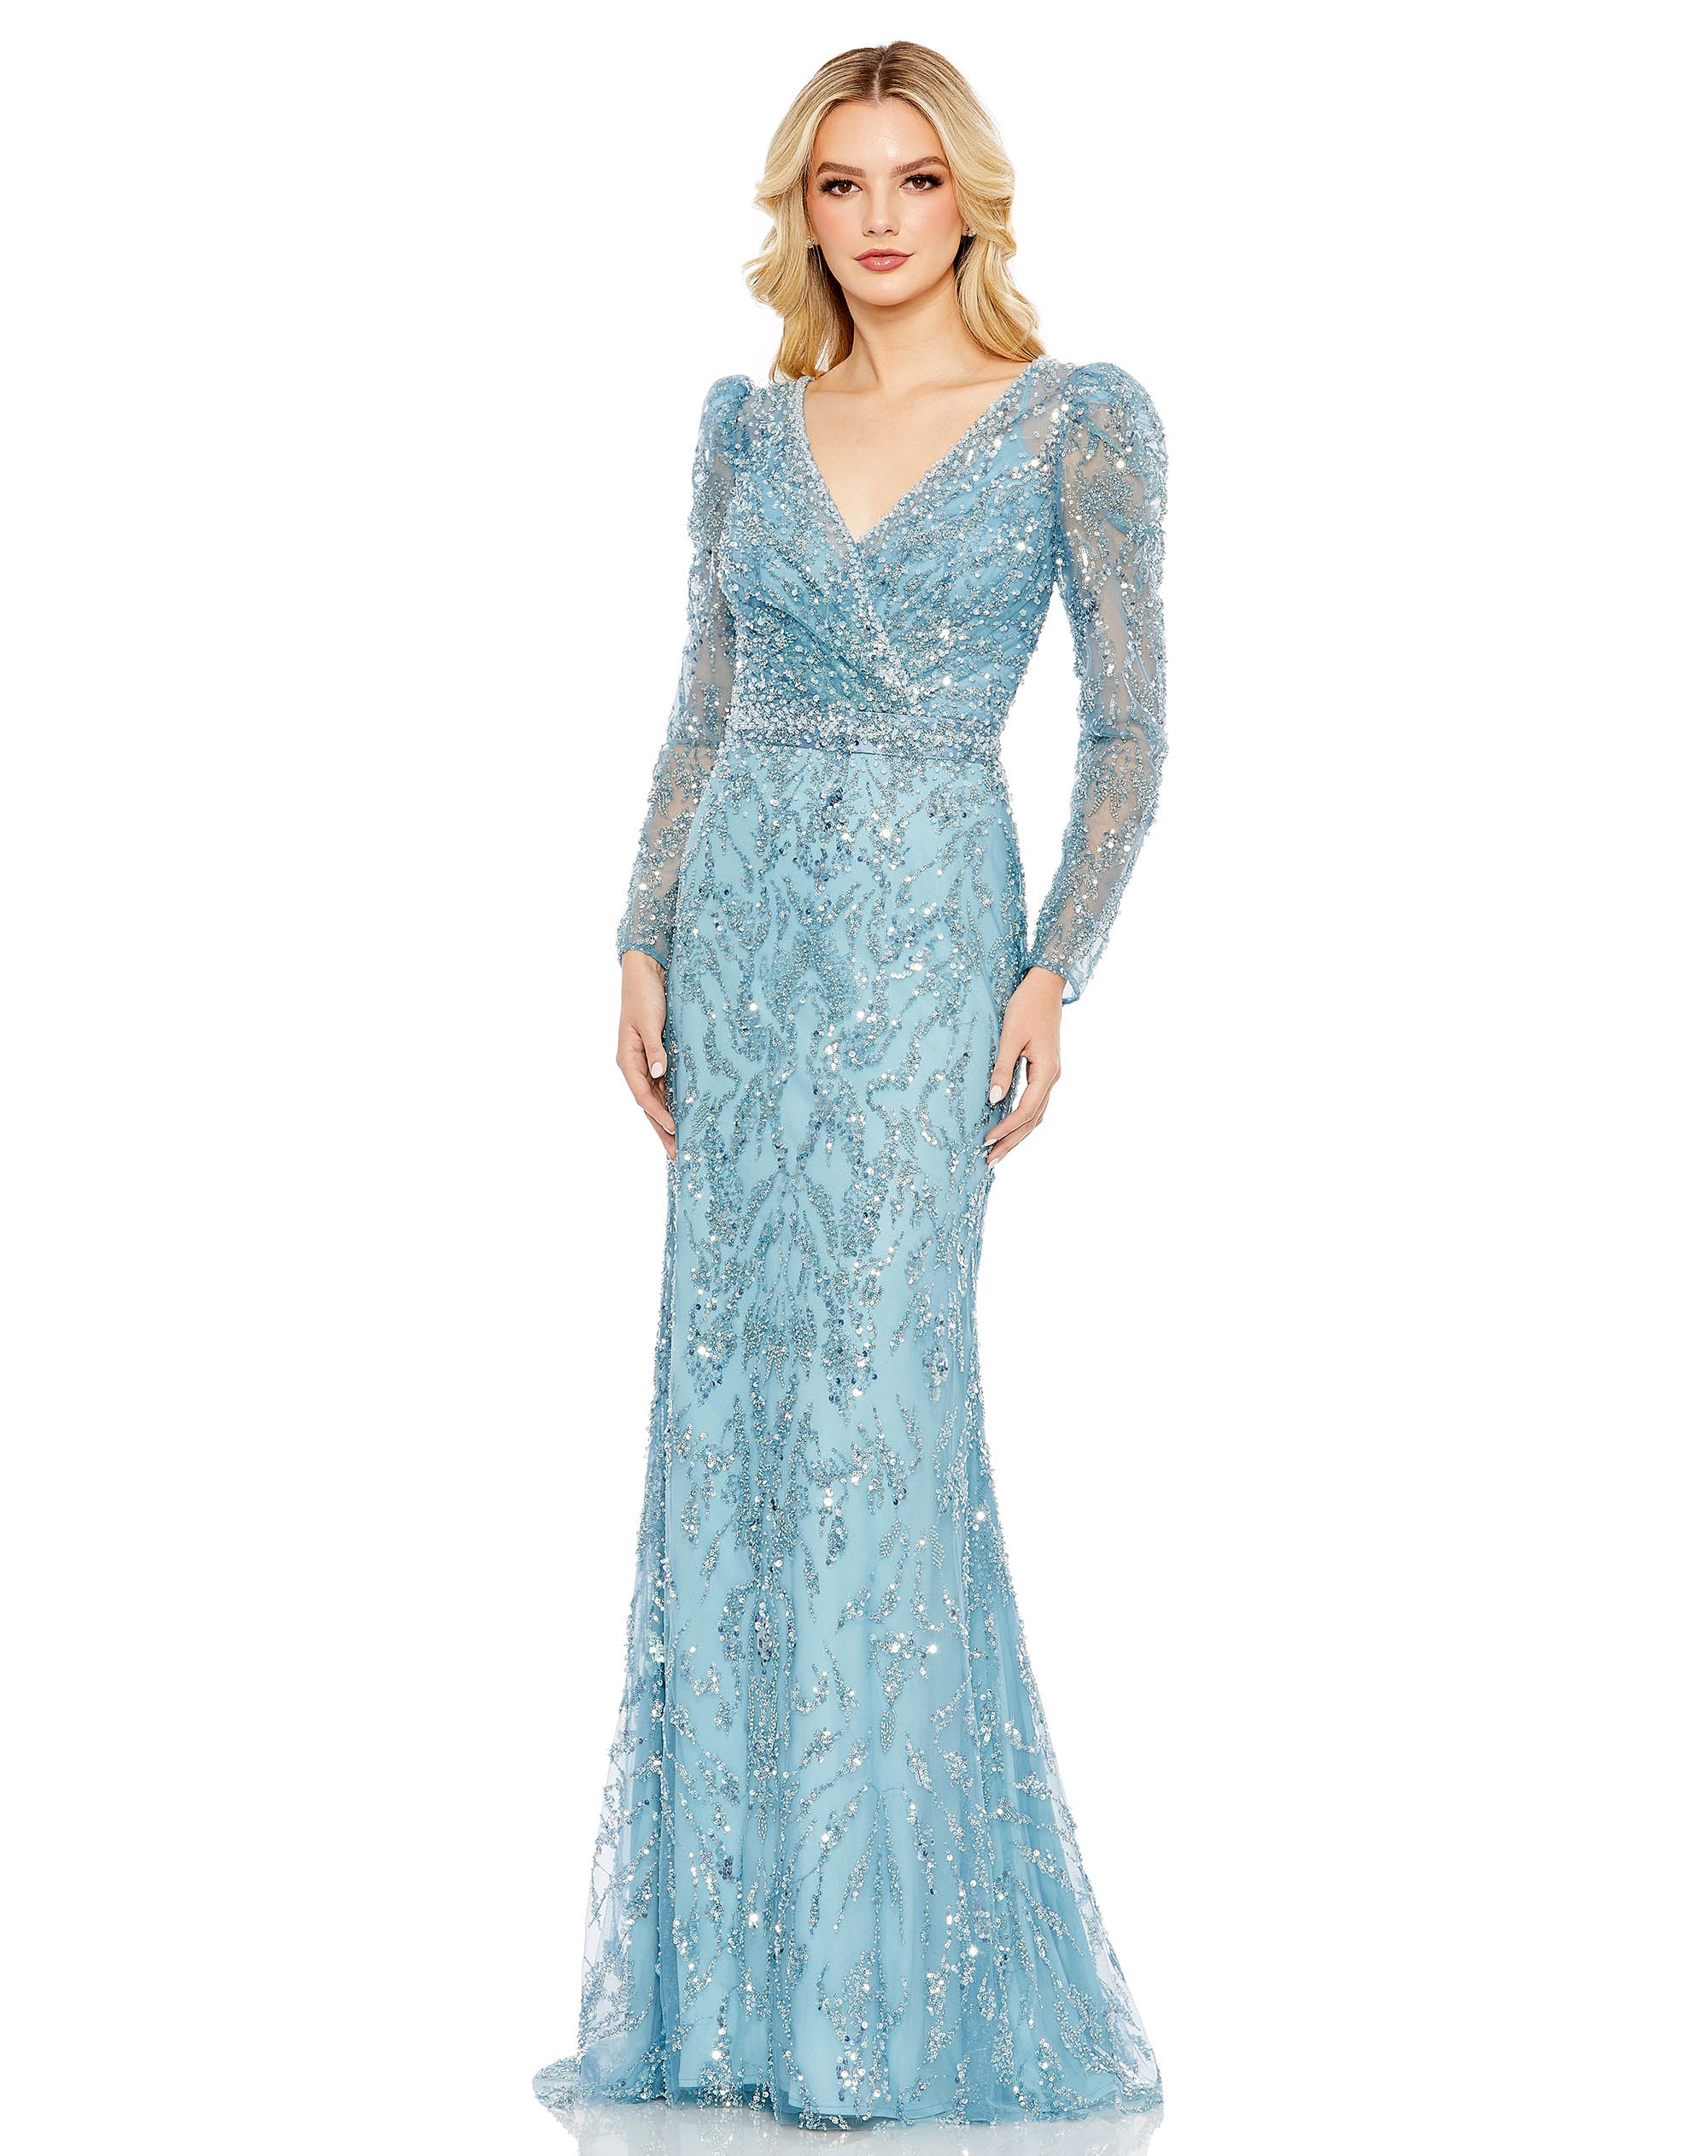 Wrap Around V-Neck Full Sleeve Sequin Embellished Gown